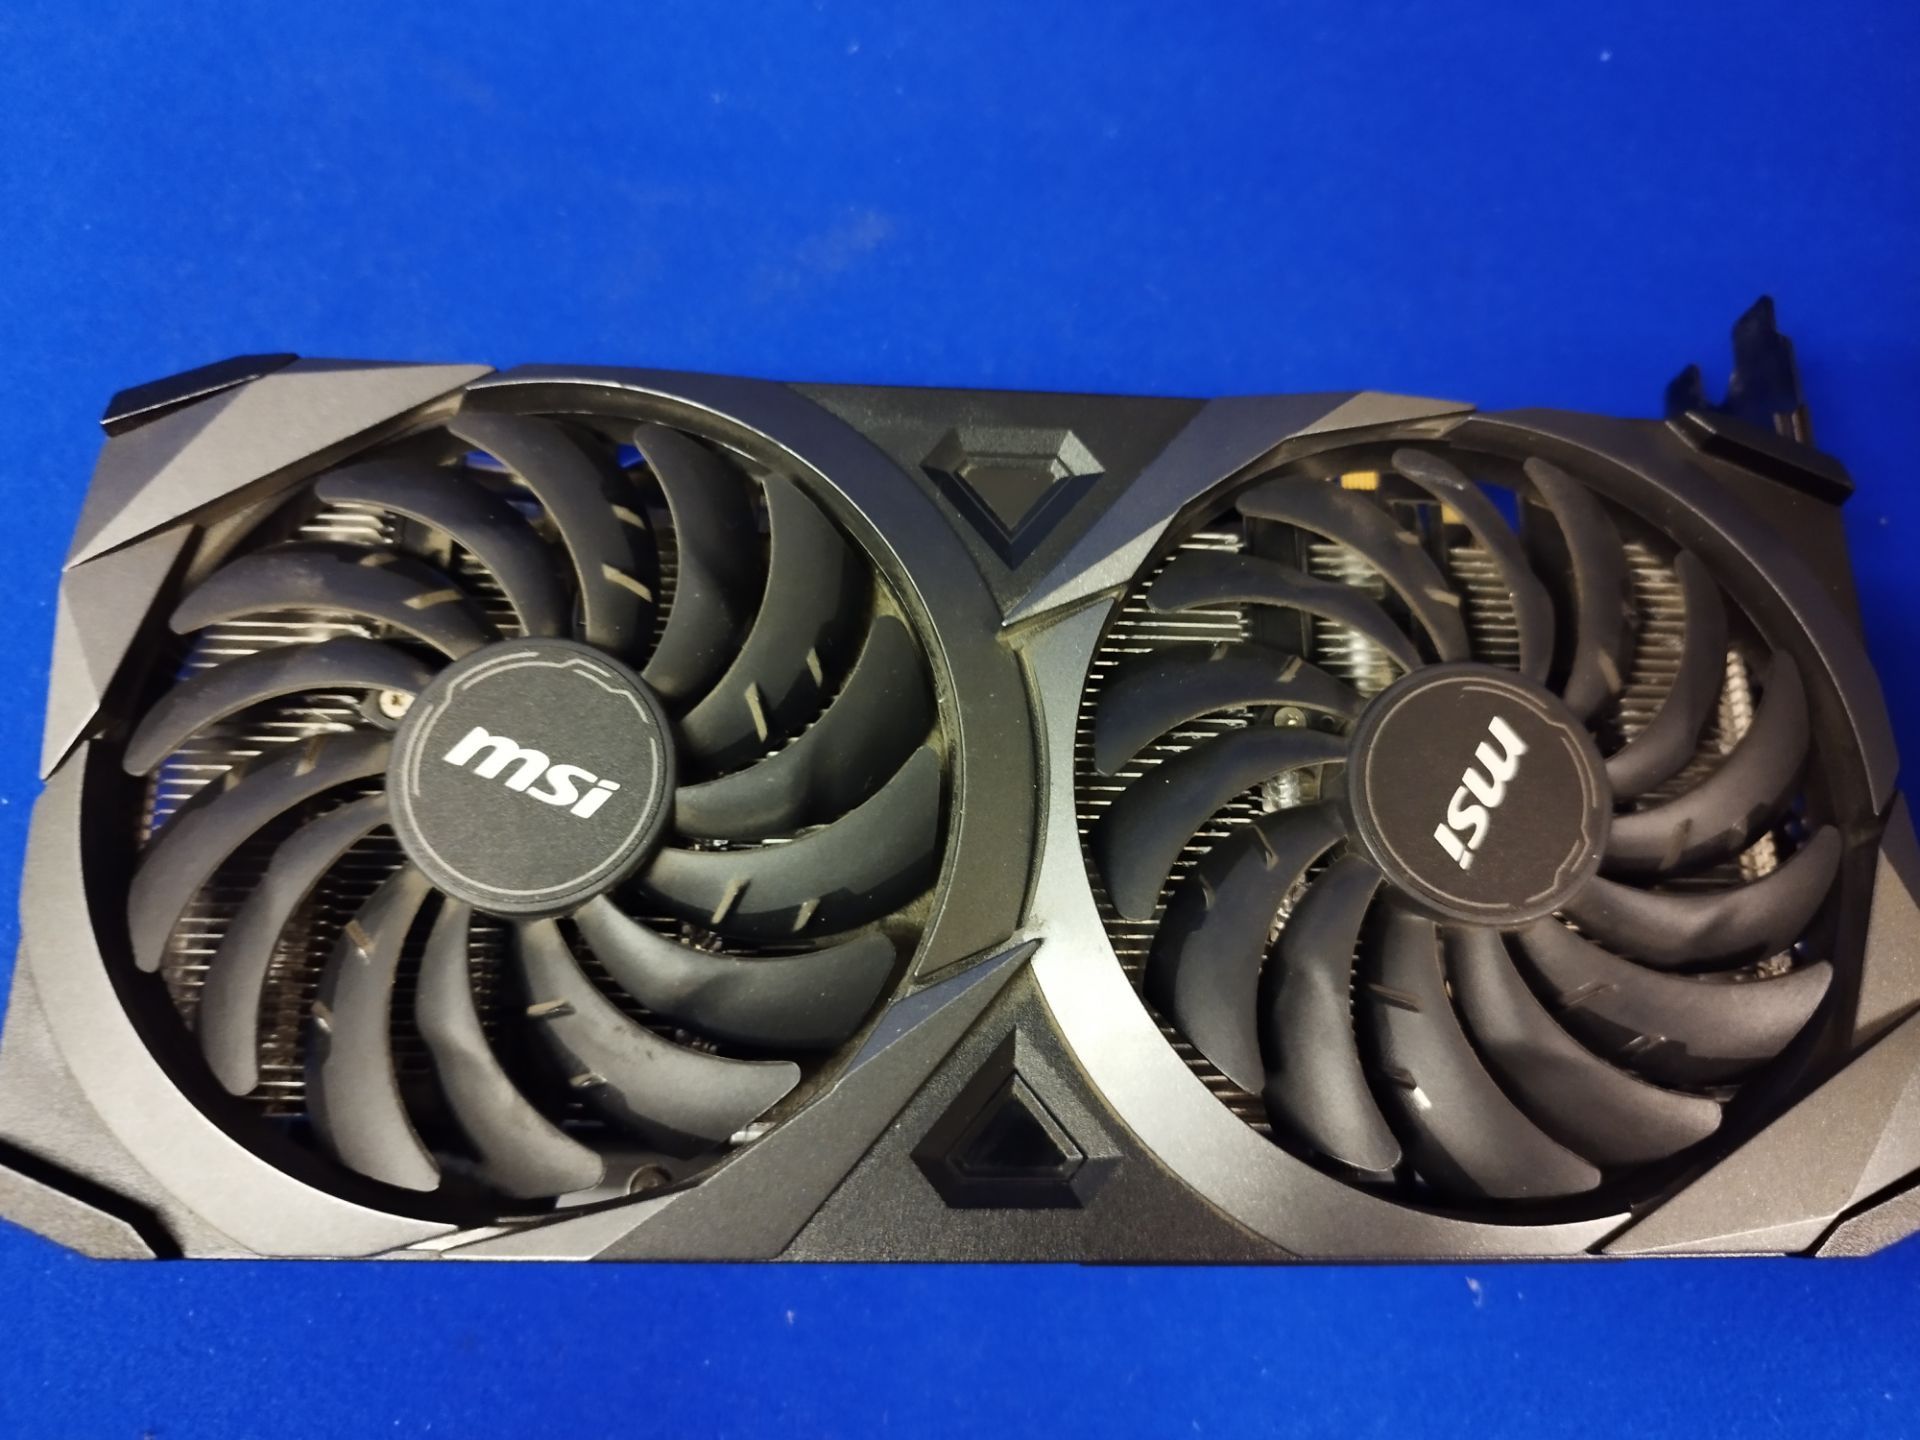 Nvidia GeForce RTX 3070 Graphics Card - Used - PLEASE SEE PHOTOS - Image 9 of 9